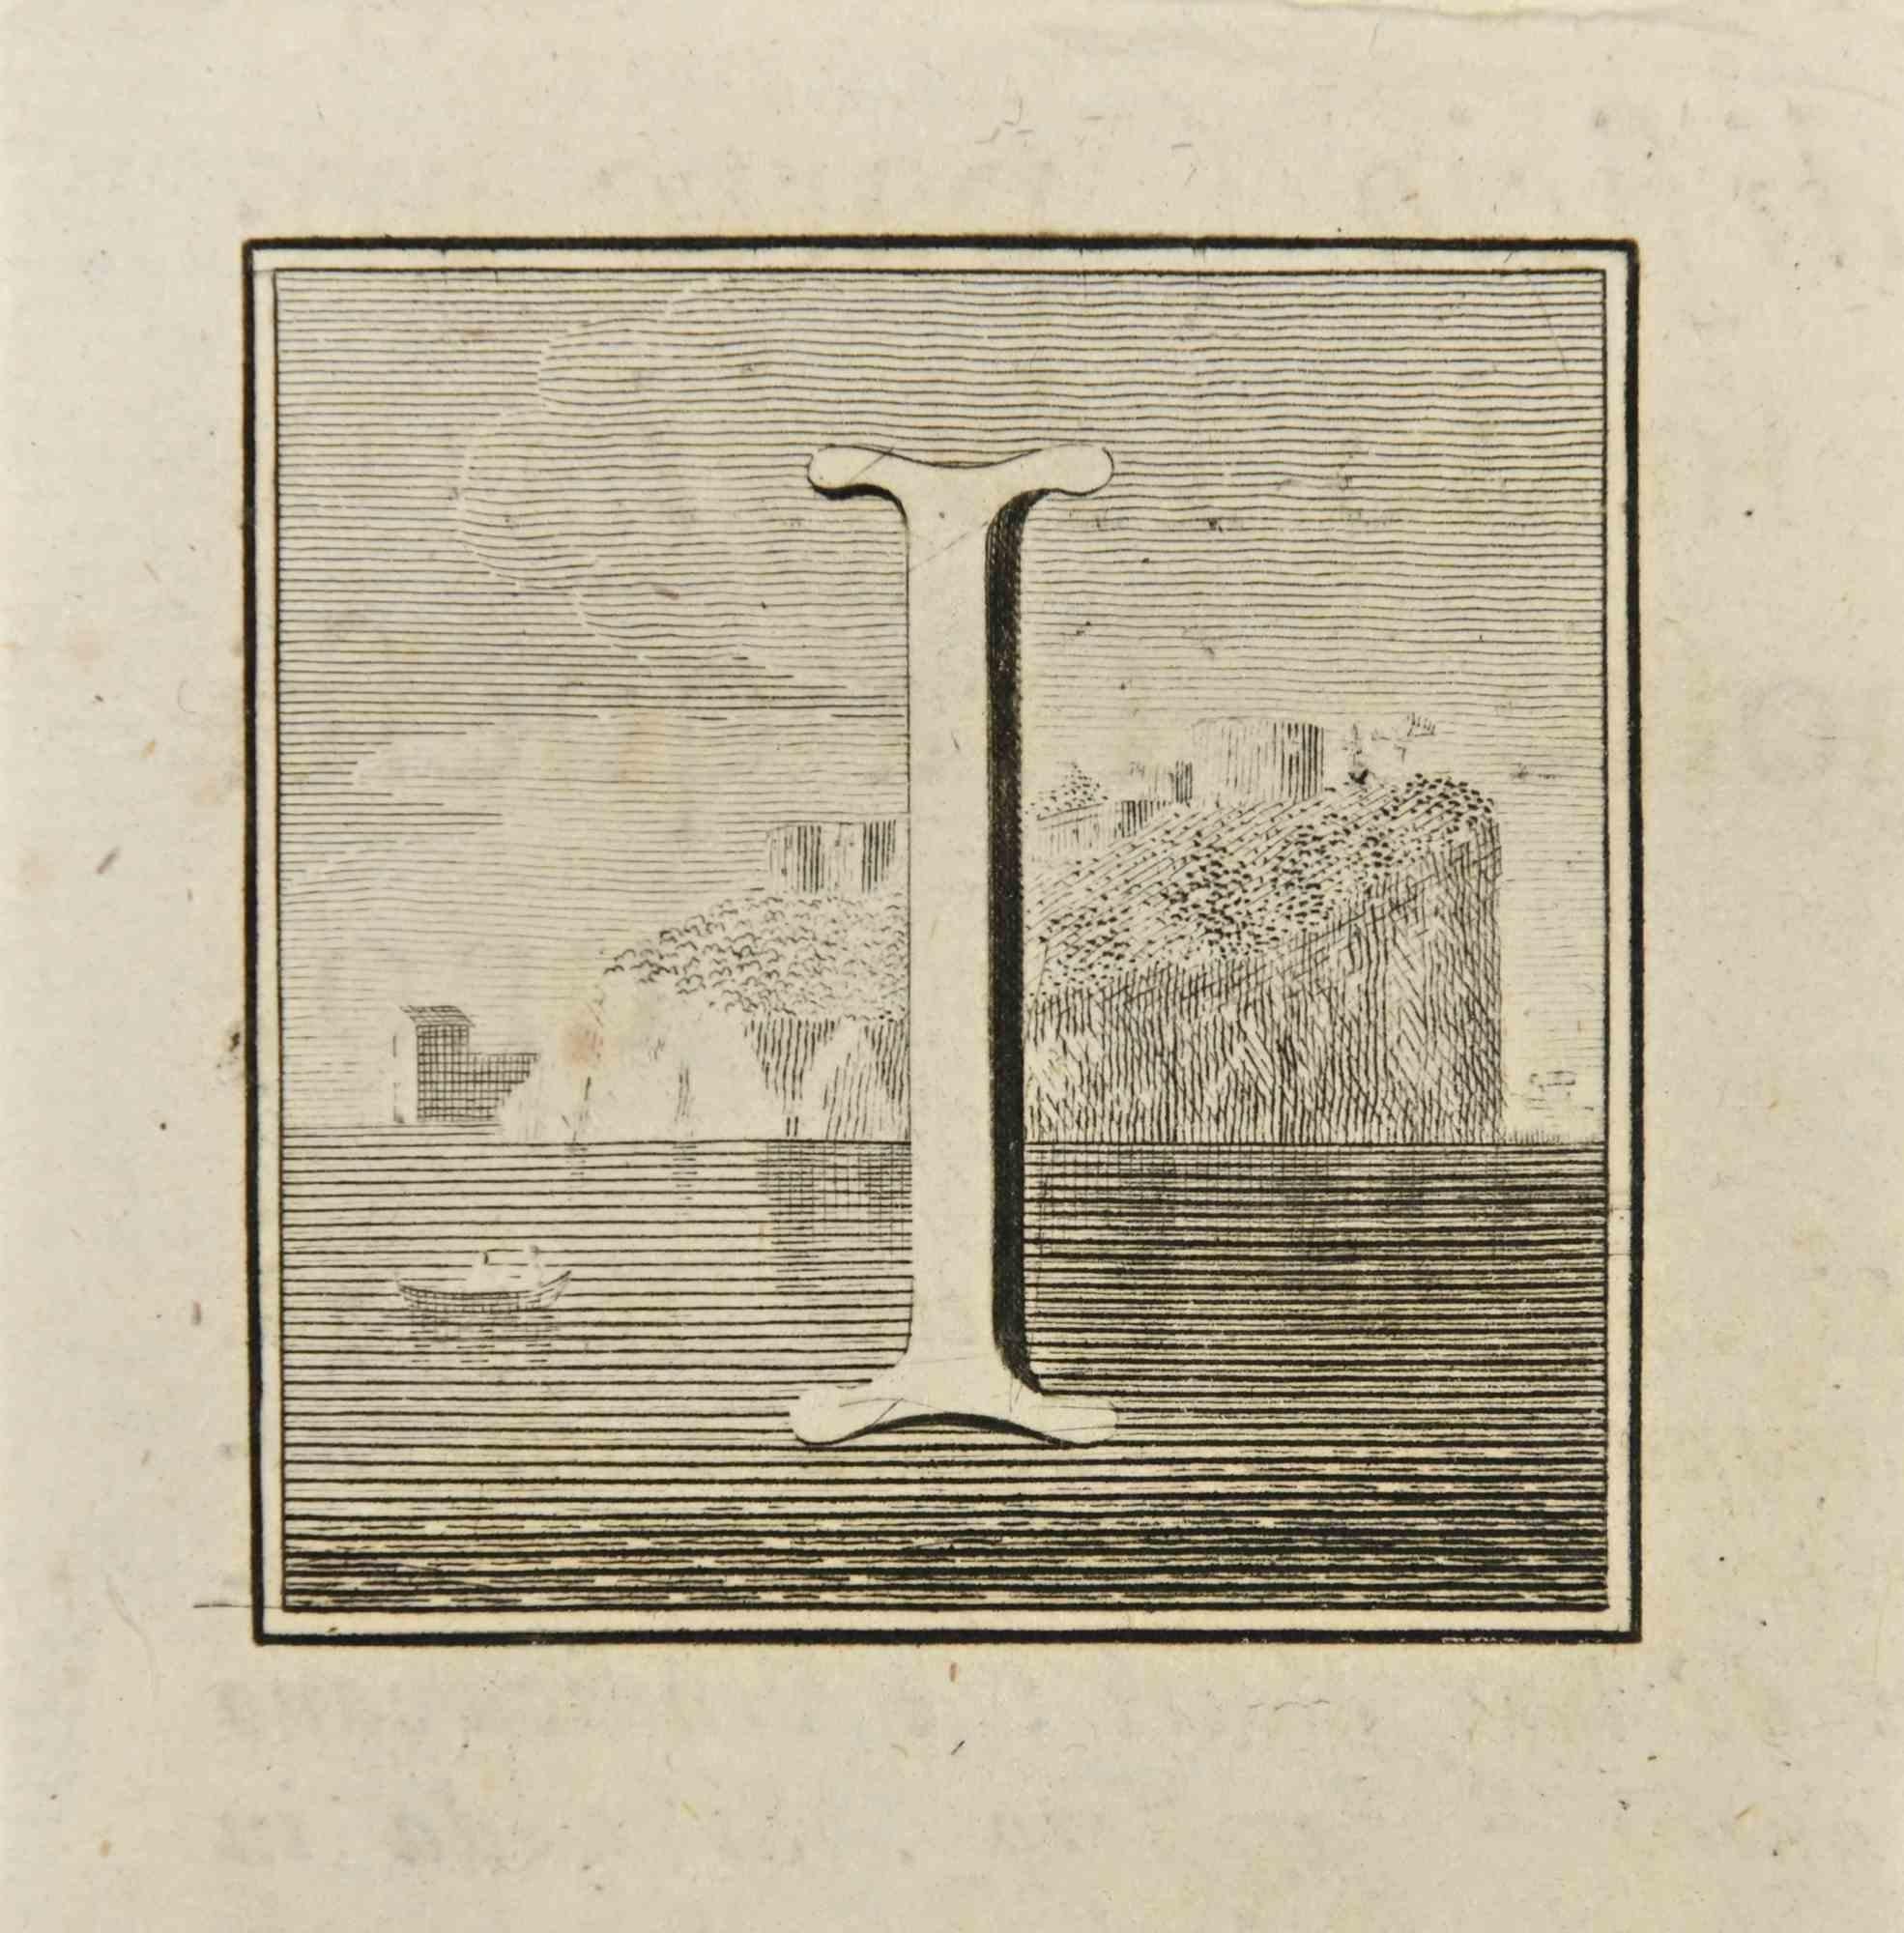 Letter of the Alphabet I,  from the series "Antiquities of Herculaneum", is an etching on paper realized by Luigi Vanvitelli in the 18th century.

Good conditions.

The etching belongs to the print suite “Antiquities of Herculaneum Exposed”